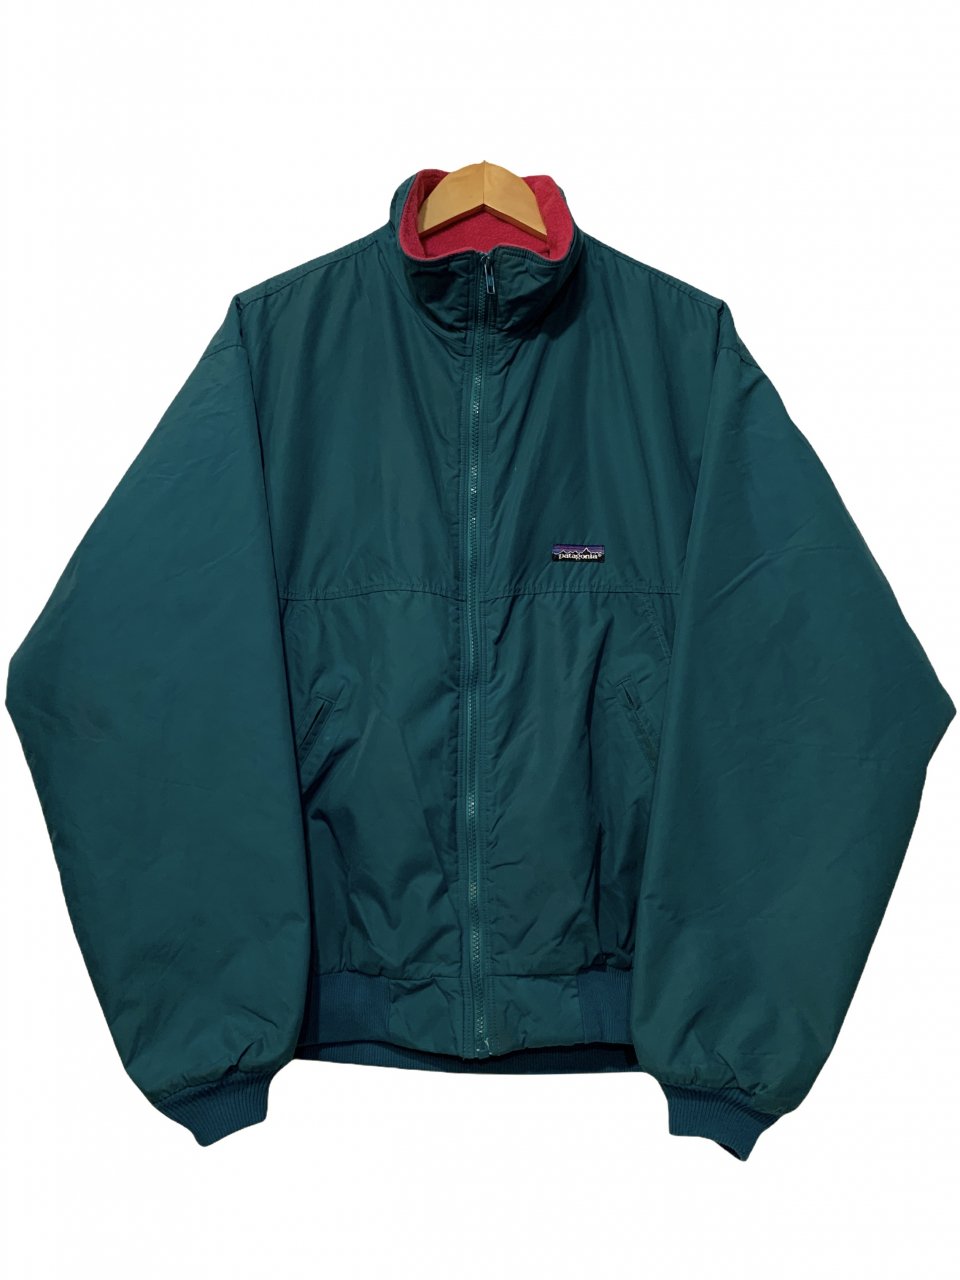 USA製 88年 patagonia Shelled Synchilla Jacket 緑ピンク L 80s